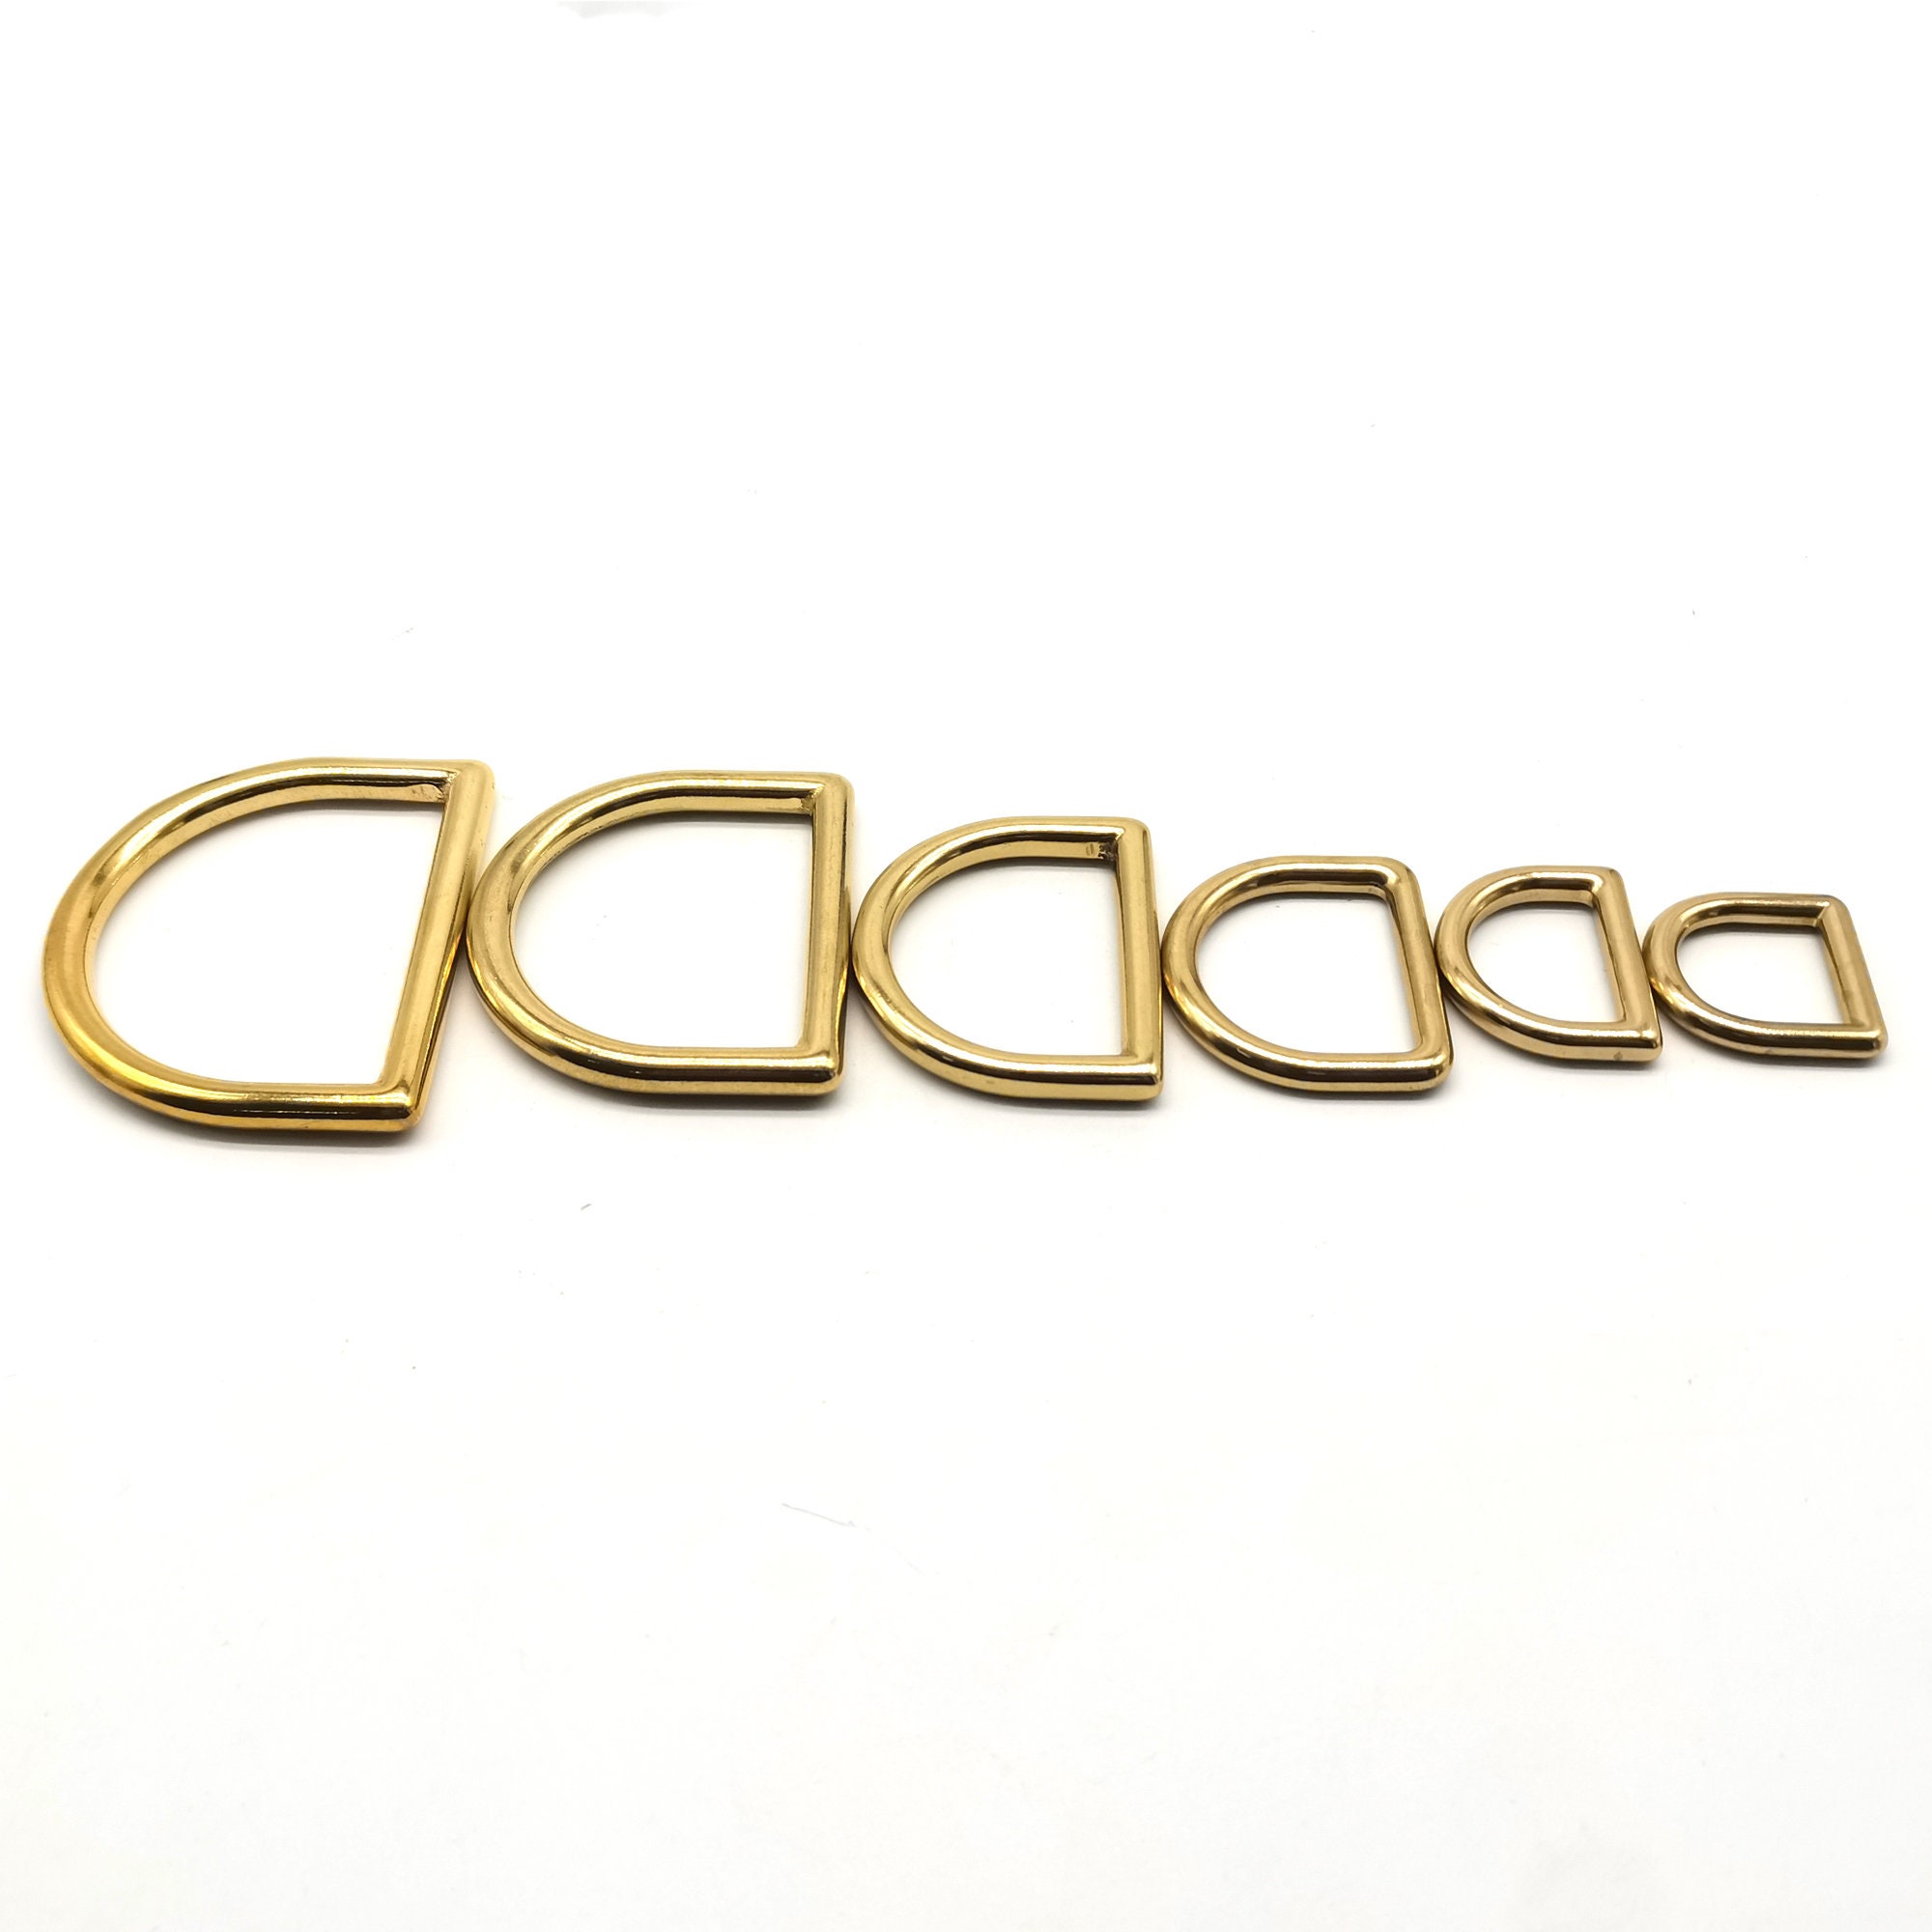 D-rings 1 3/4''45mm Gold/silver/black Metal Adjustable D Buckles D Loop D  Circles,connector D Rings for Bag/purse/leather Making Hardware. 